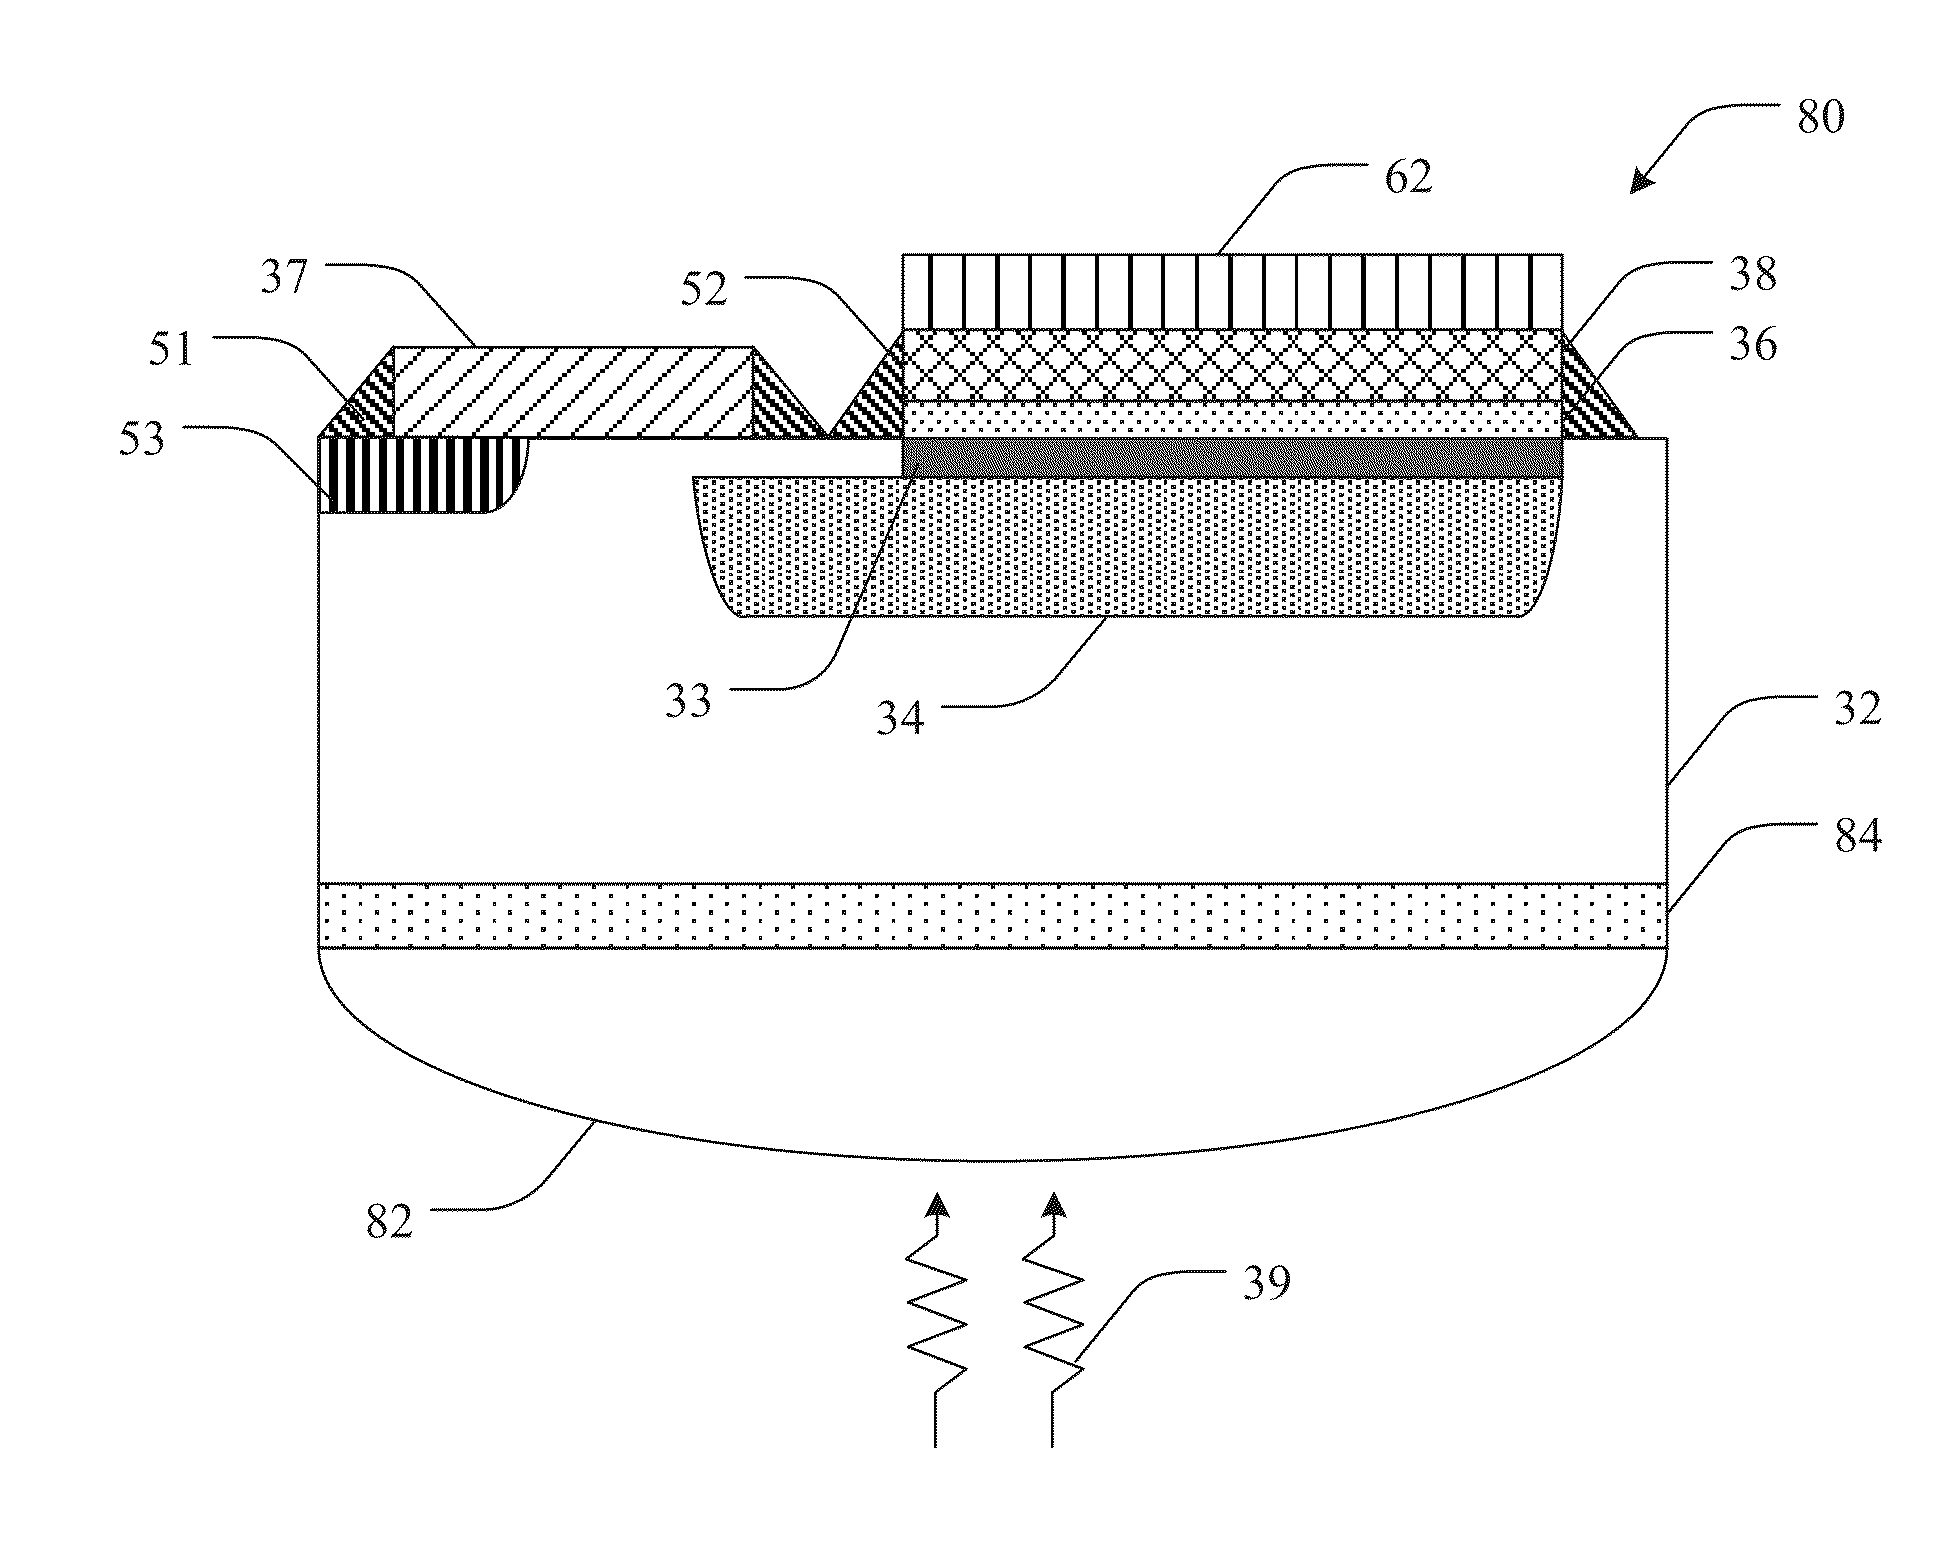 Photosensitive imaging devices and associated methods